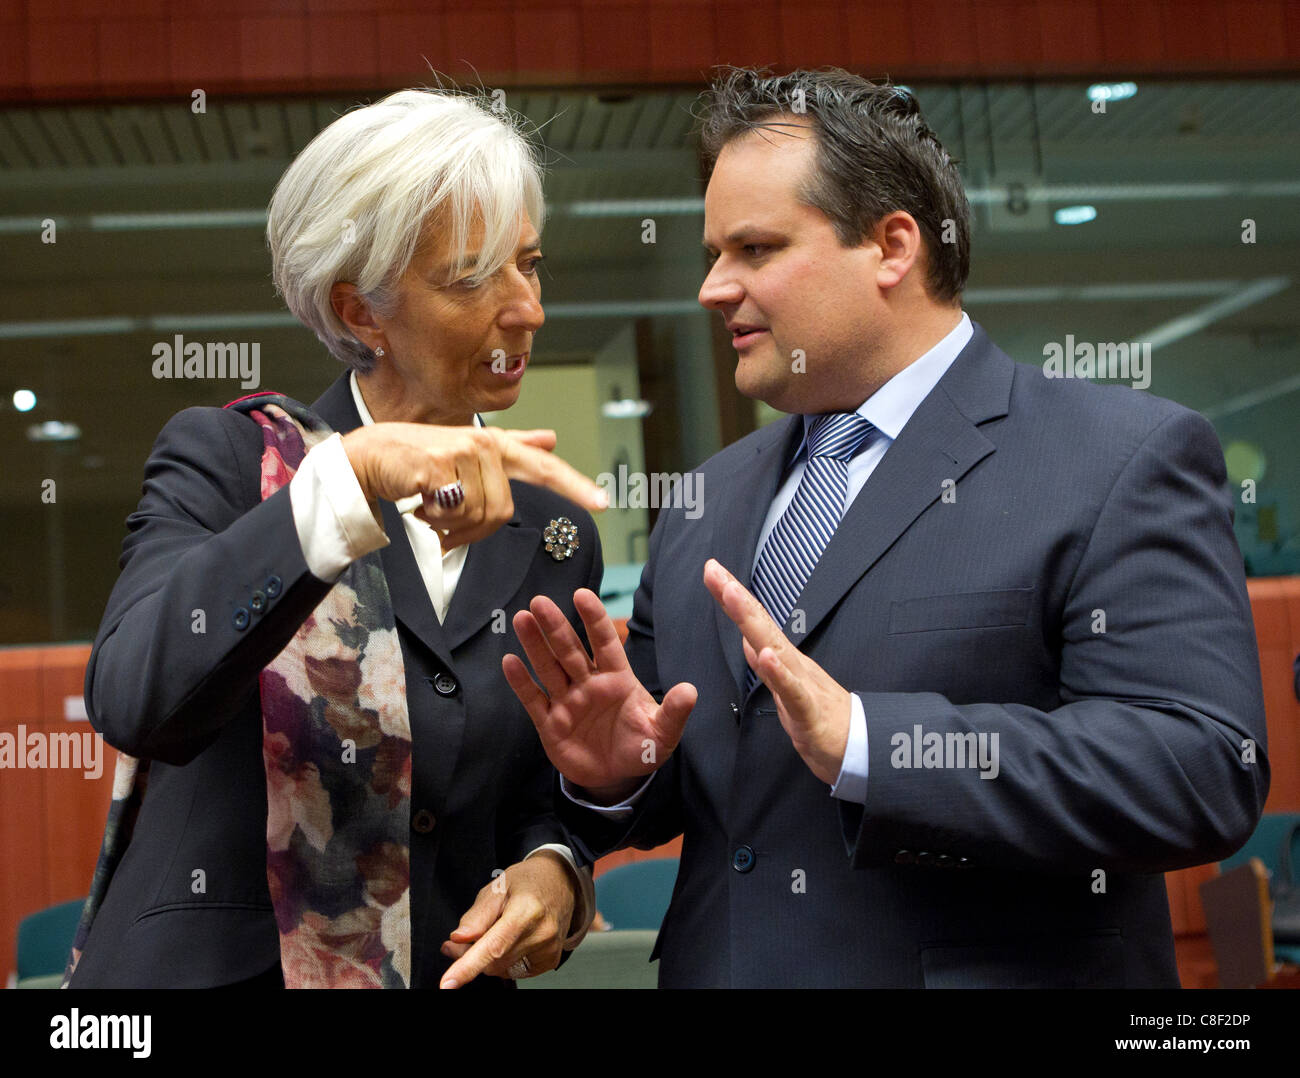 21.10.2011 - Pictured at the Eurogroup meeting of Finance Ministers of the Eurozone  Christine Lagarde, Director General of the International Monetary Fund with Dutch Finance Minister, Jan Kees de Jager. Stock Photo